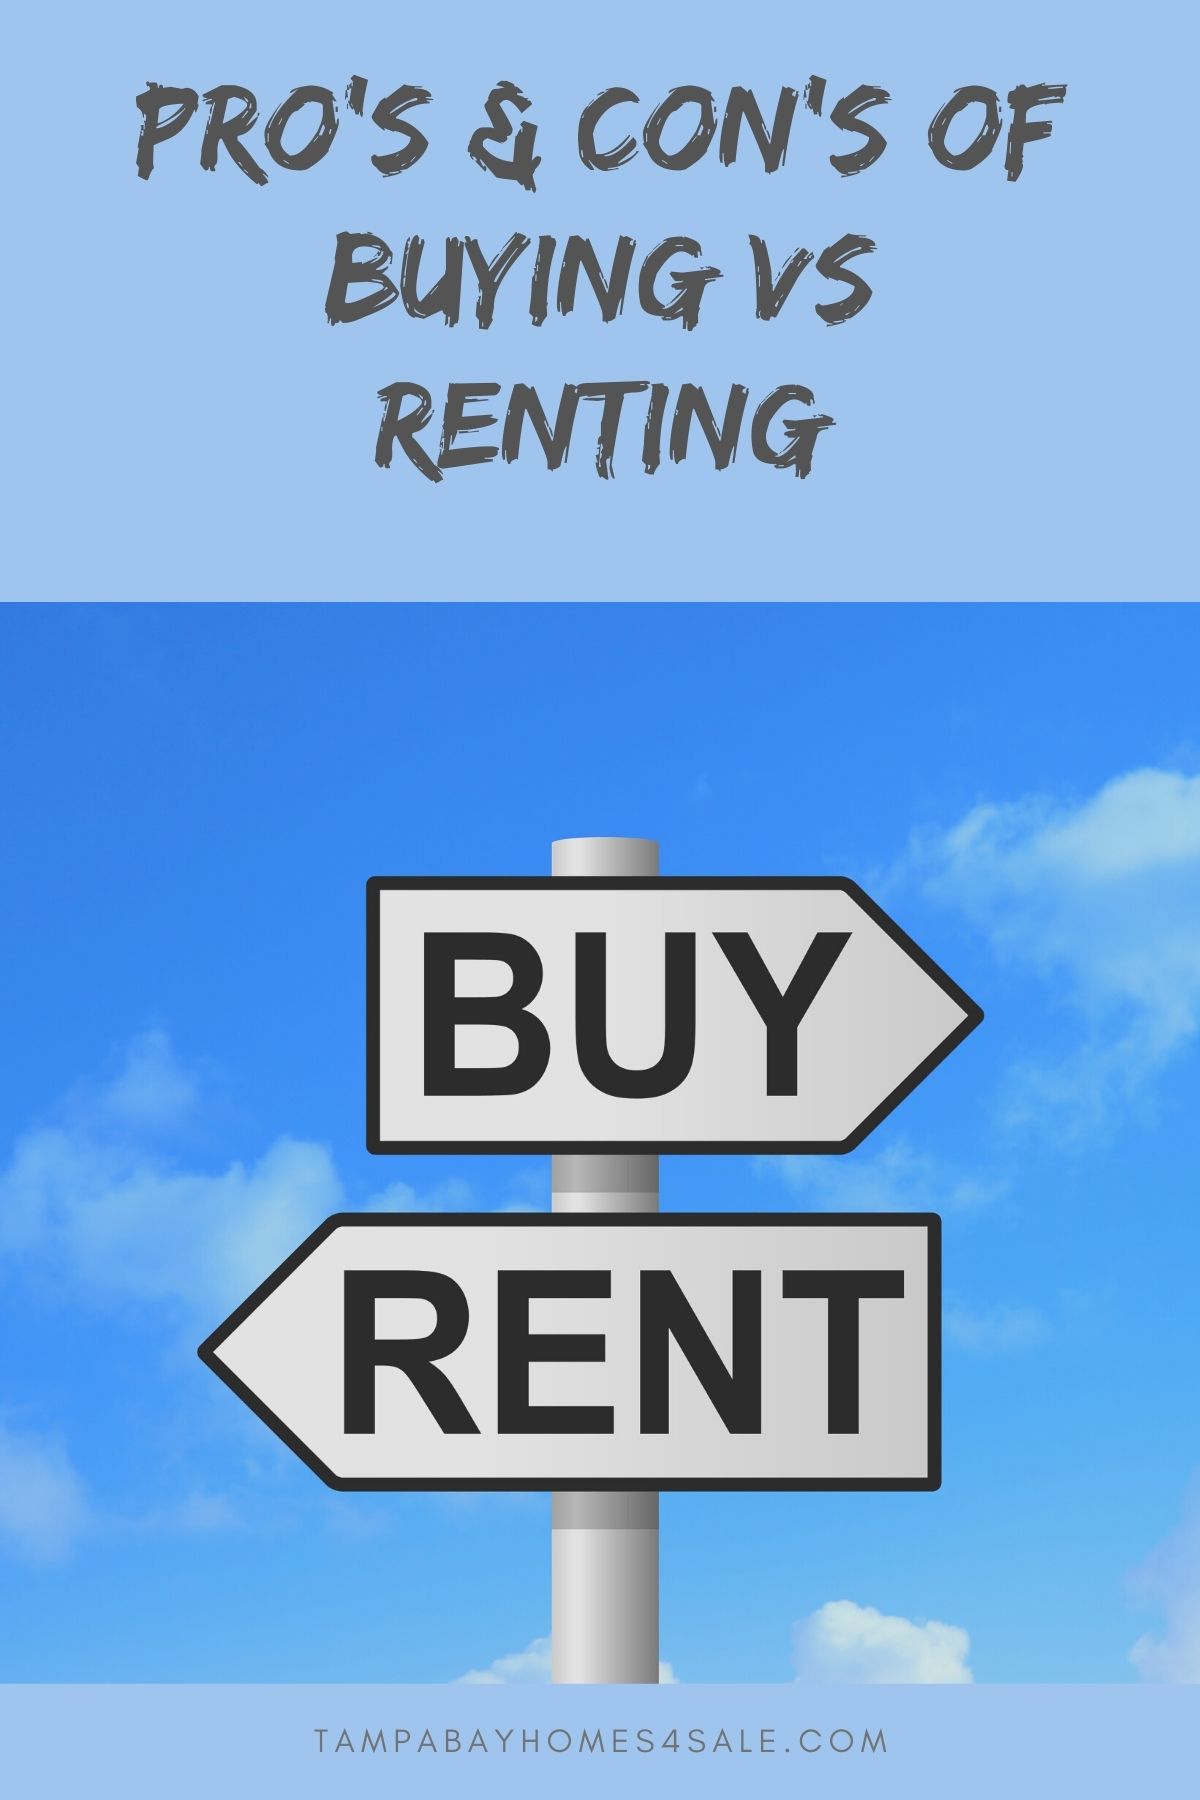 Pro’s & Con’s of Buying vs Renting